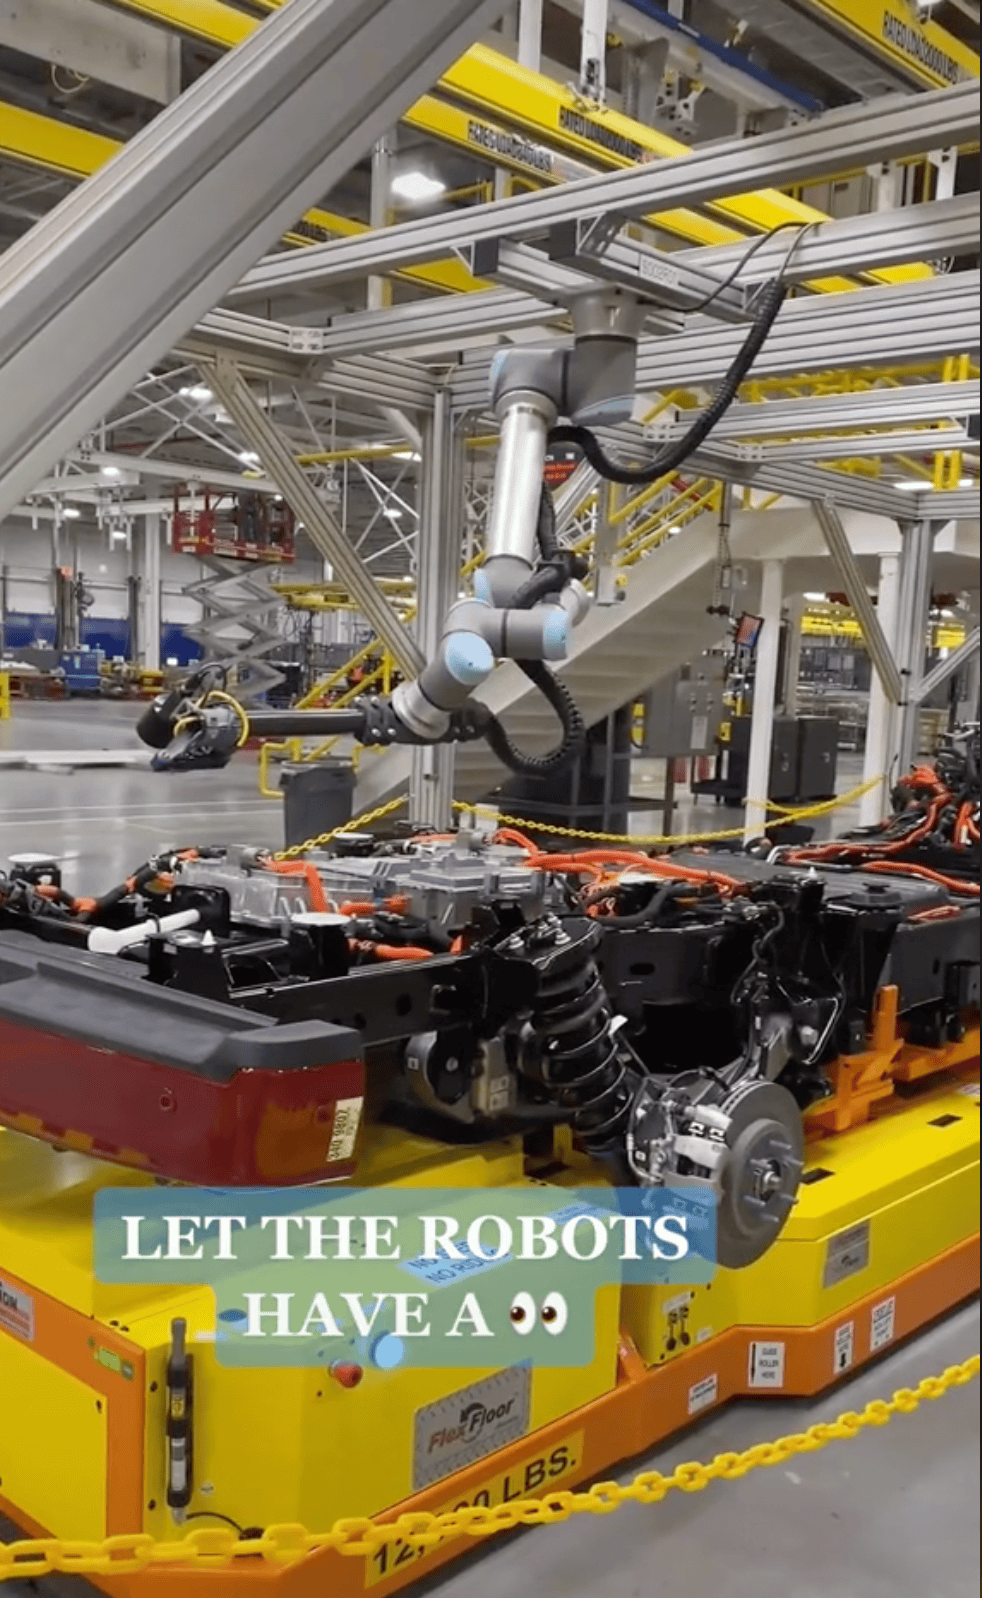 Ford F-150 Lightning F-150 Lightning Production Assembly Plant Video Shared by Ford on Tiktok f150 lightning production assembly line plant 4